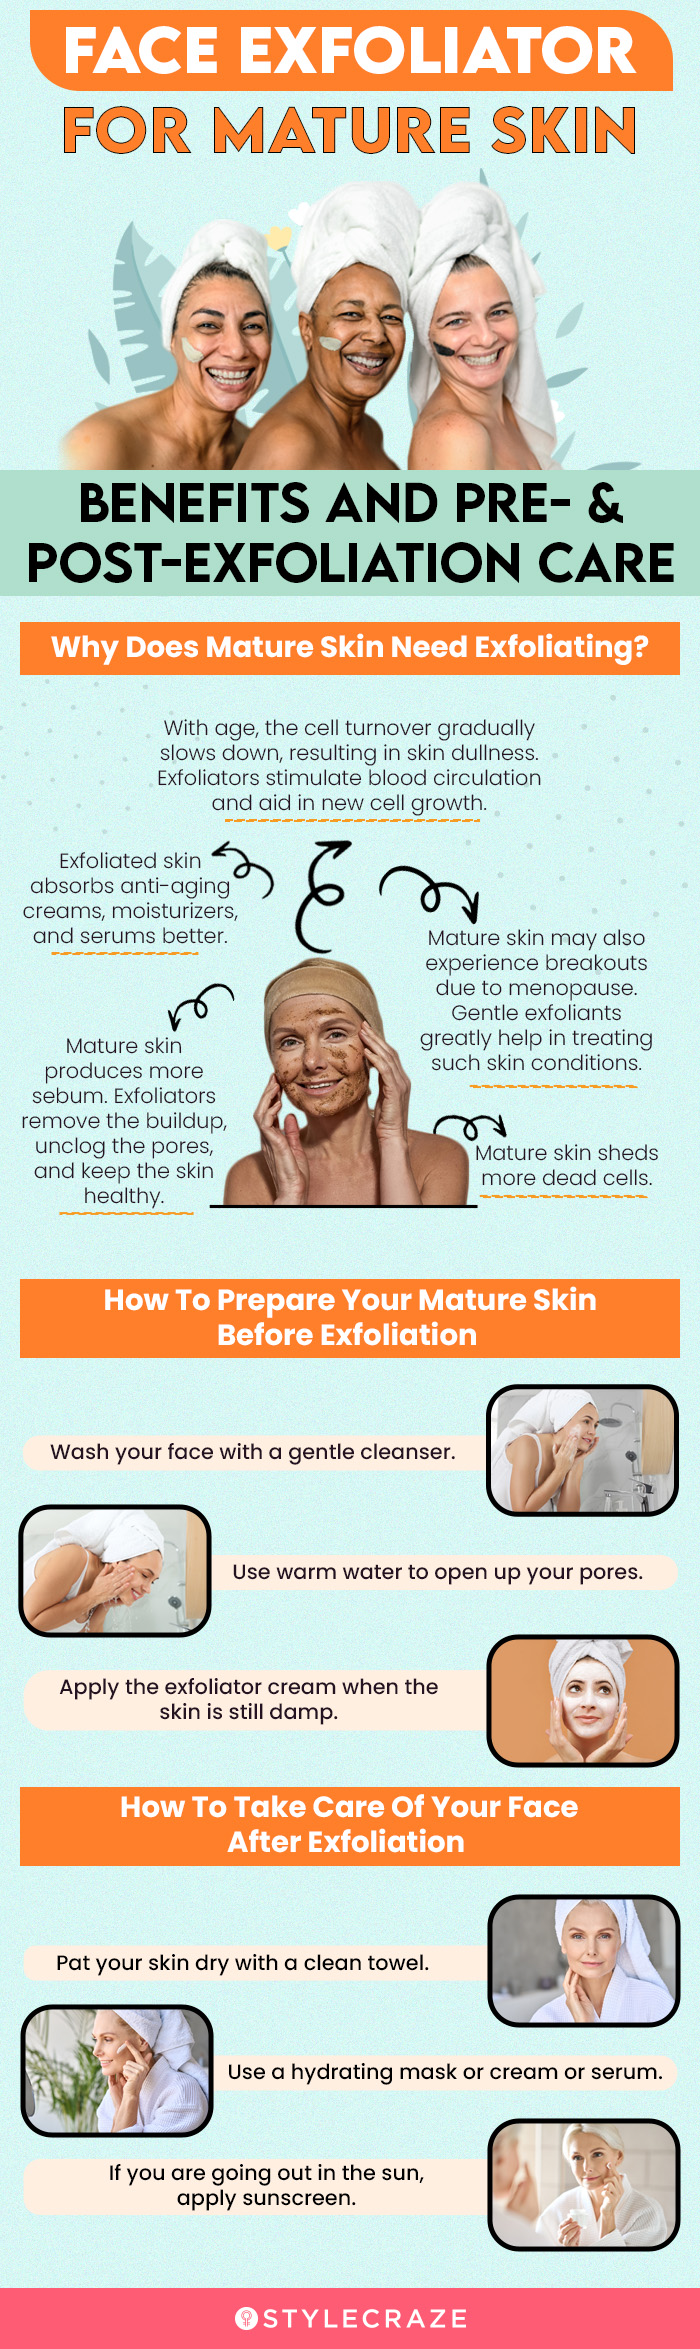 Face Exfoliator For Mature Skin: Benefits And Pre- & Post-Exfoliation Care [infographic]